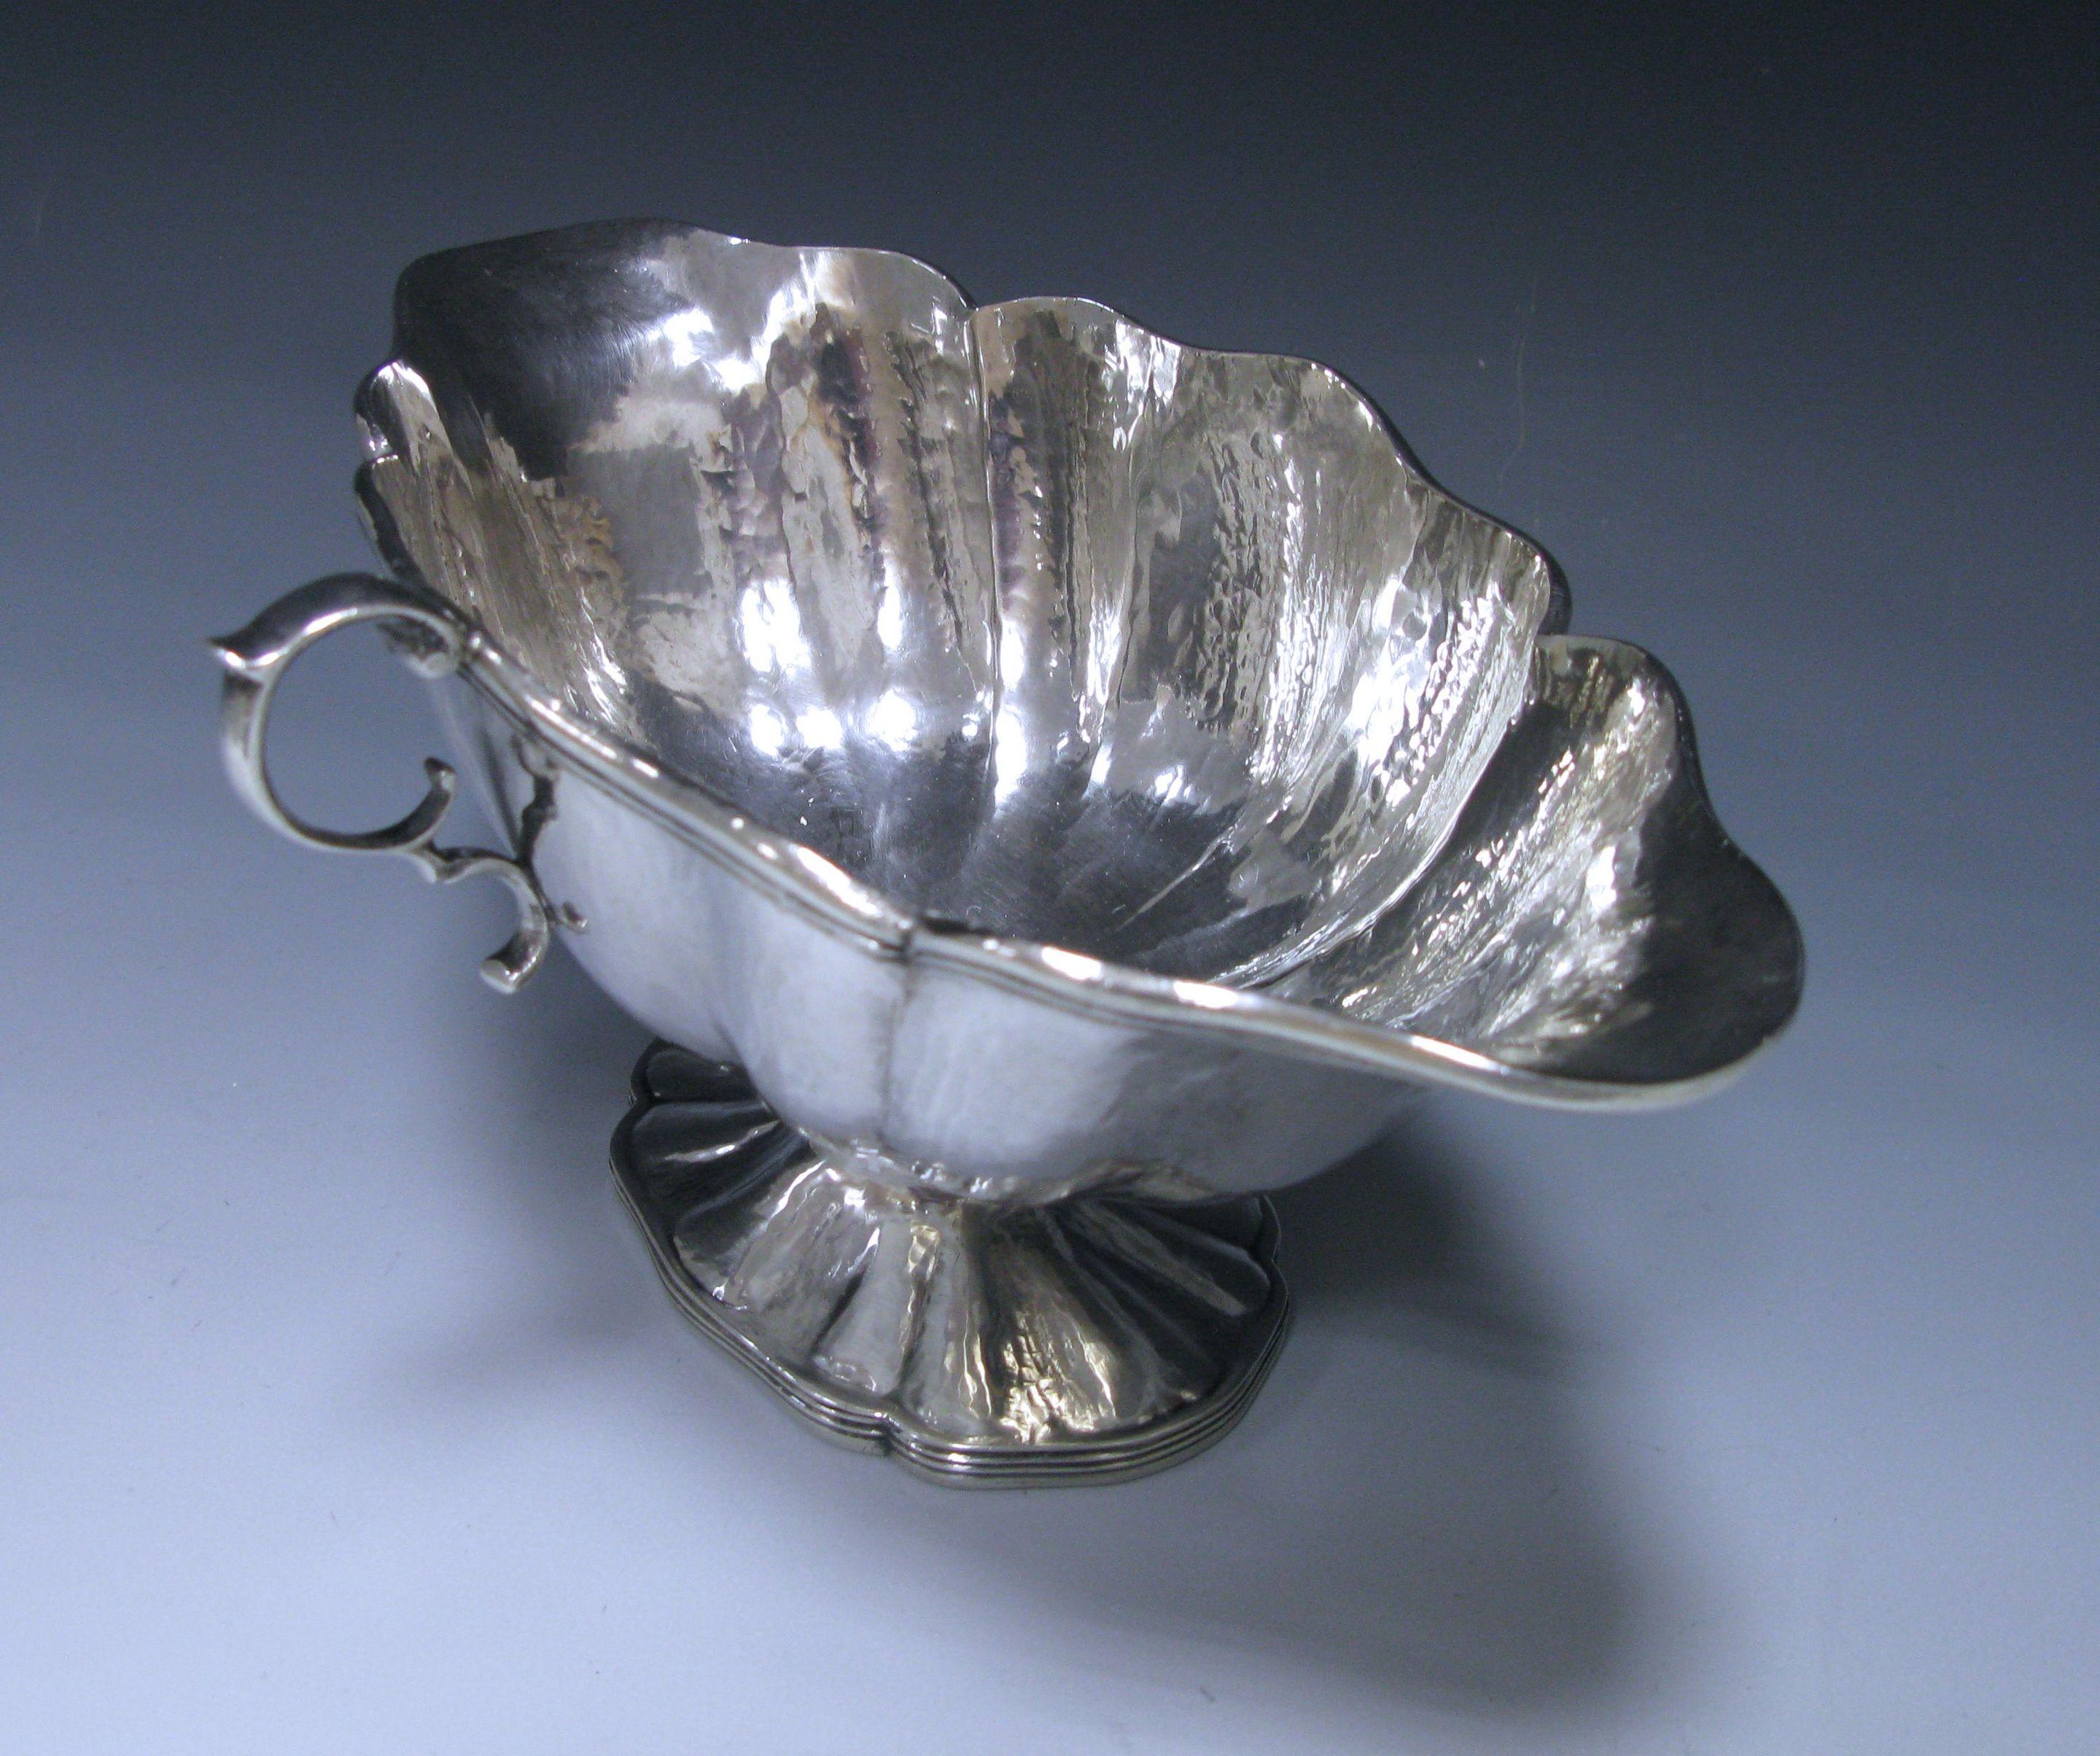 A Spanish sterling 915 standard silver double-lipped sauce boat of shaped oval form with hand-hammered finish. The sauce boat has a single C-scroll handle, an applied reeded rim, all standing on a pedestal foot. Measures: Length 9.25 inches 23.50